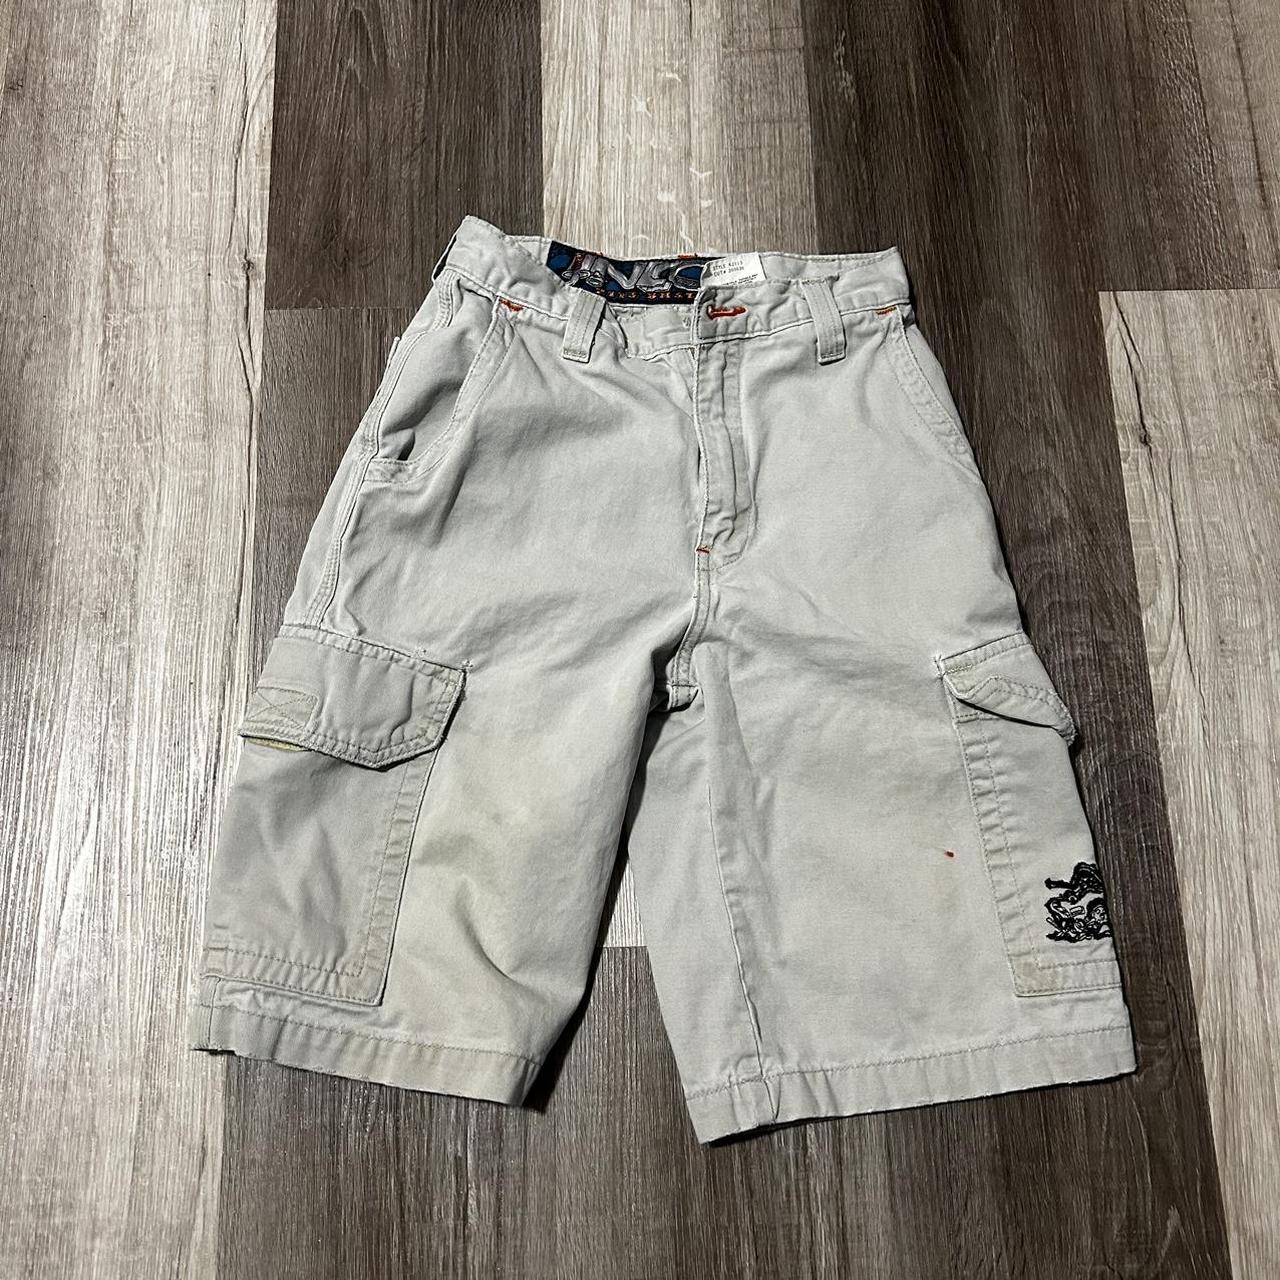 JNCO Jorts size 10 Missing one button Dm with offers - Depop